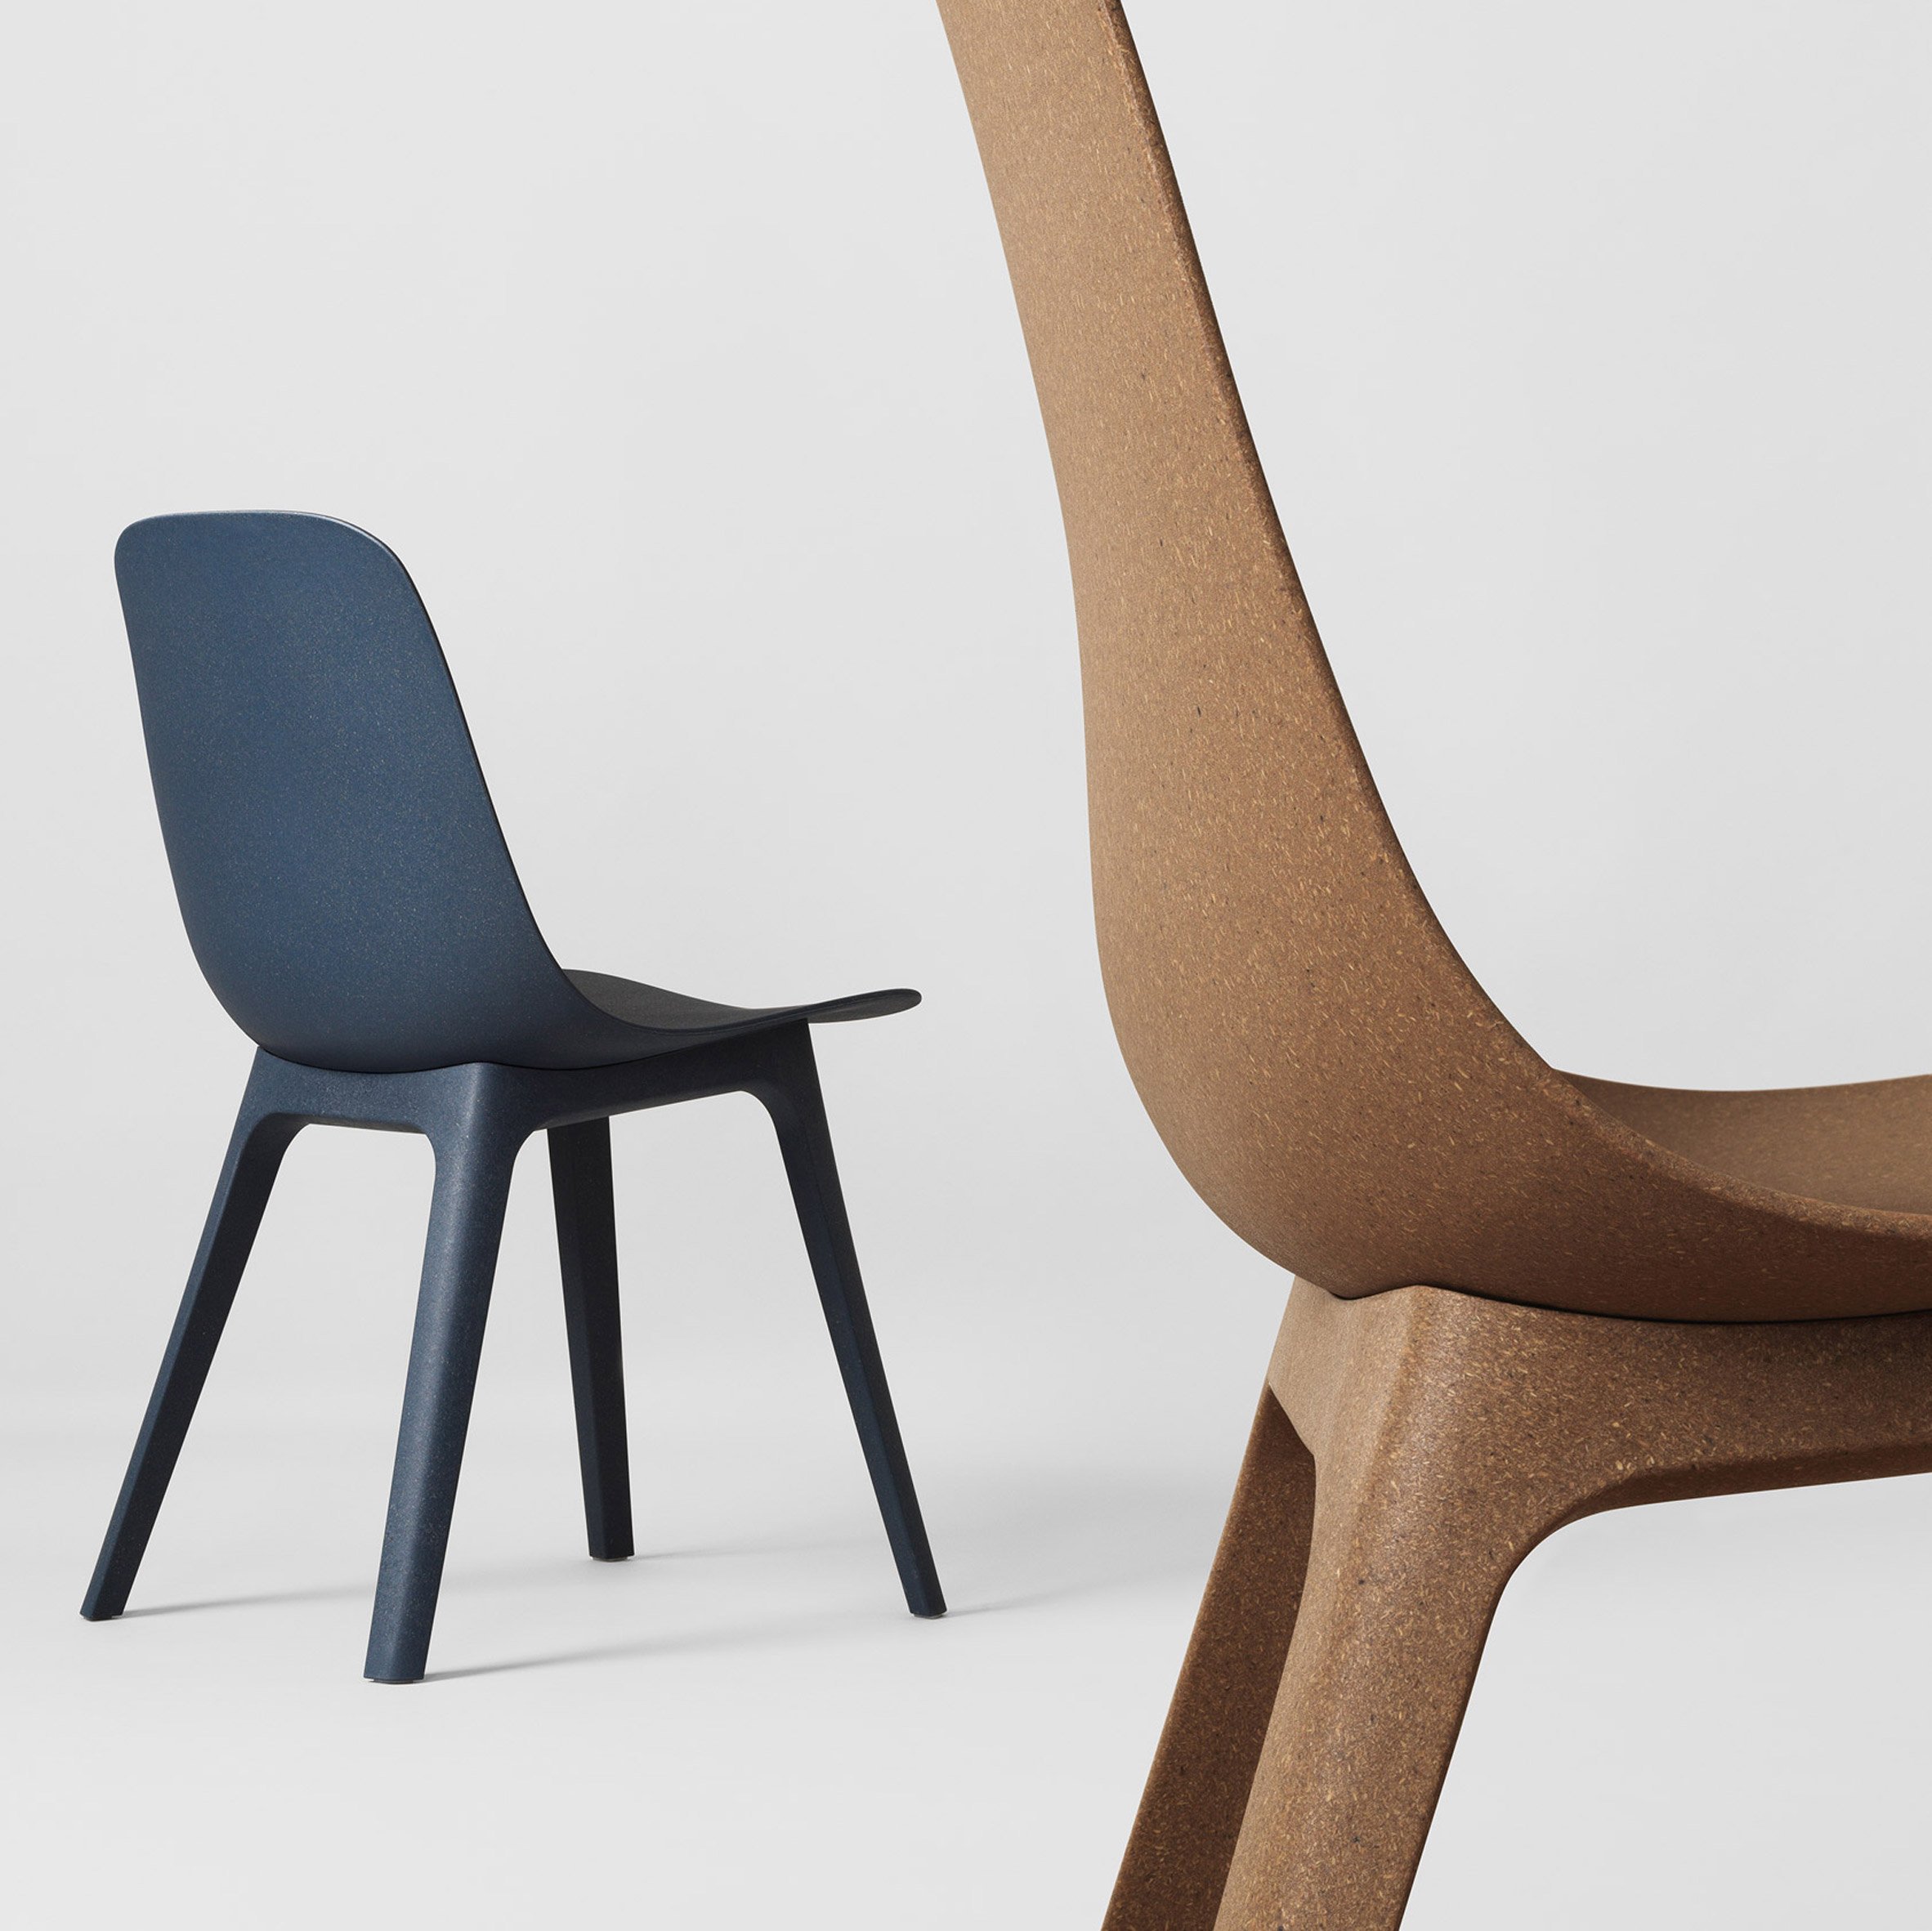 Form Us With Love Uses Recycled Wood And Plastic To Create Ikea Chair